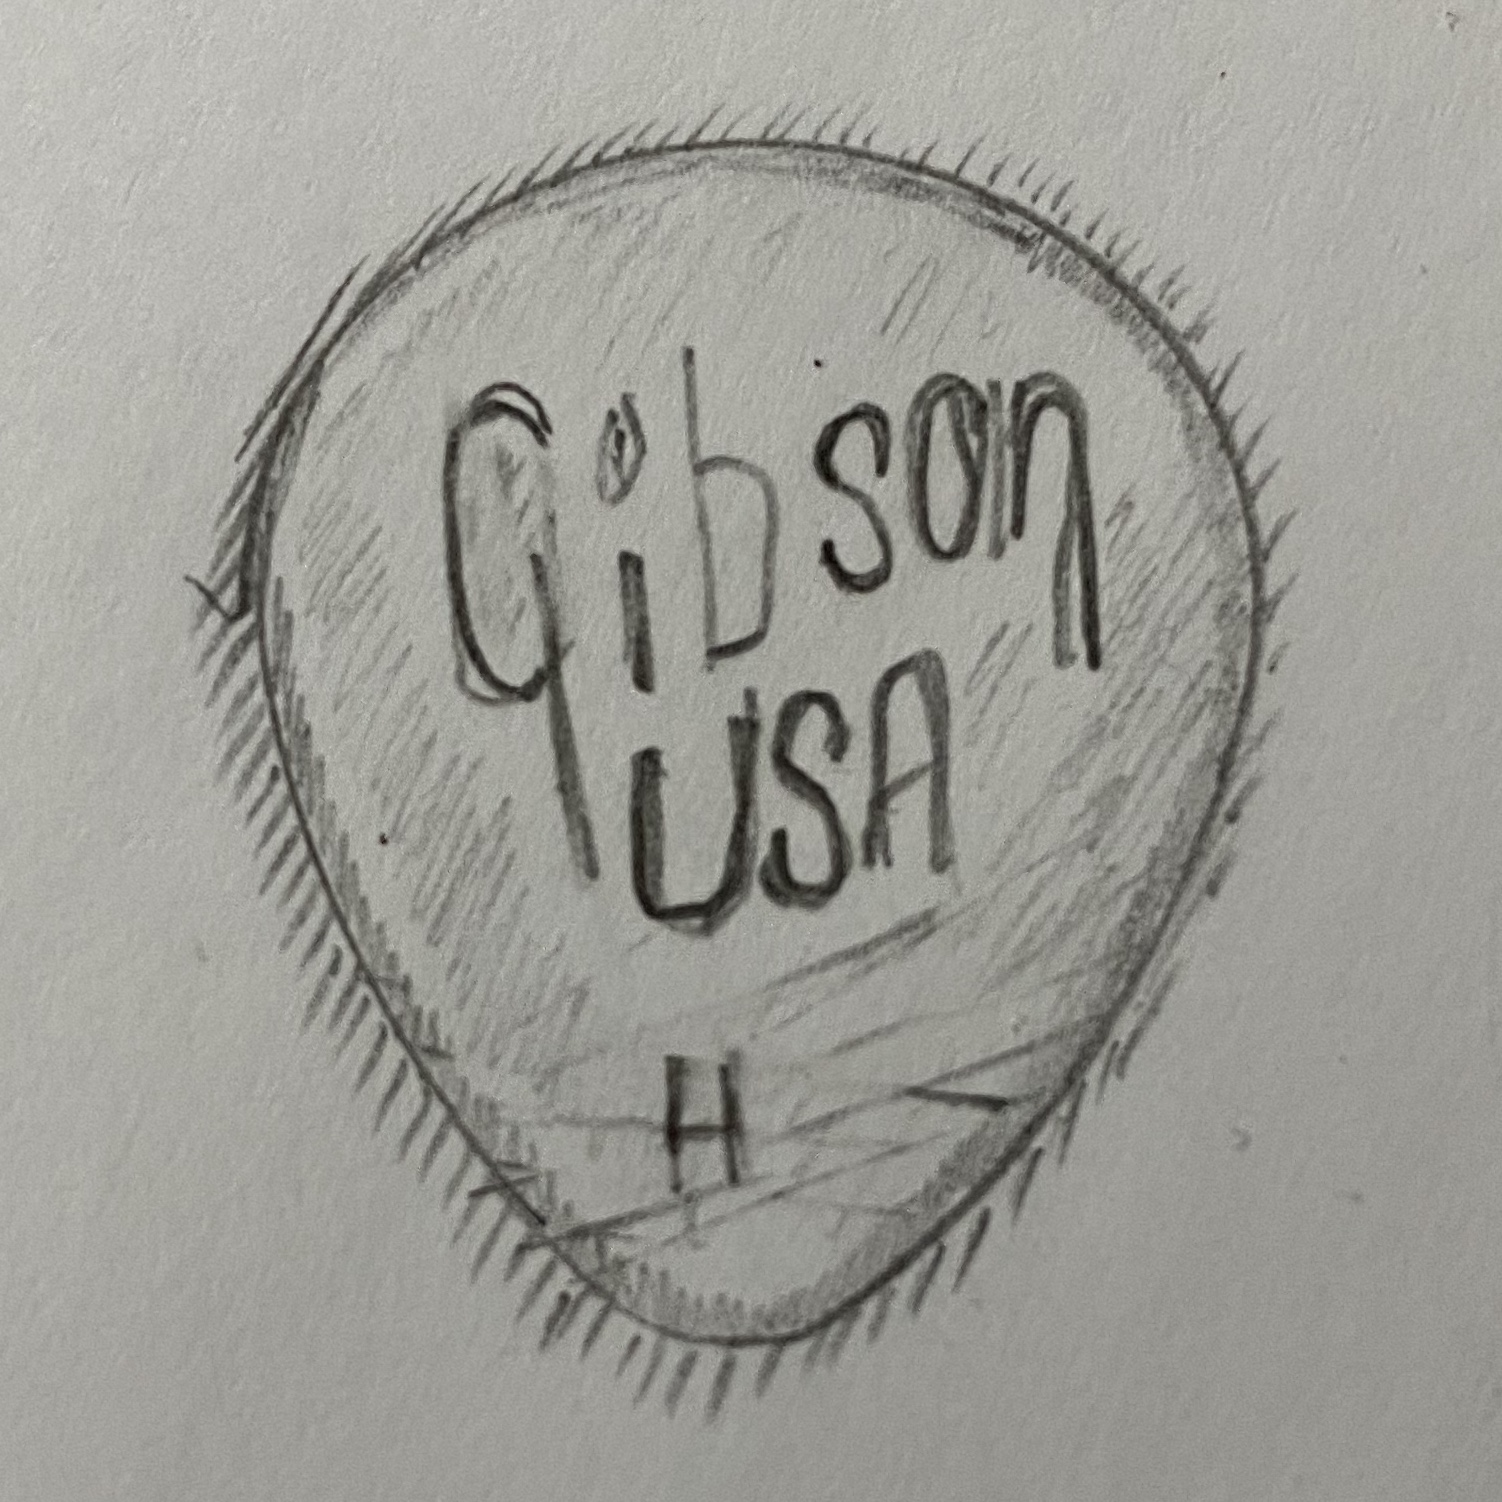 Pencil drawing of a scuffed up guitar pick, it has the words "Gibson USA - H" on it.